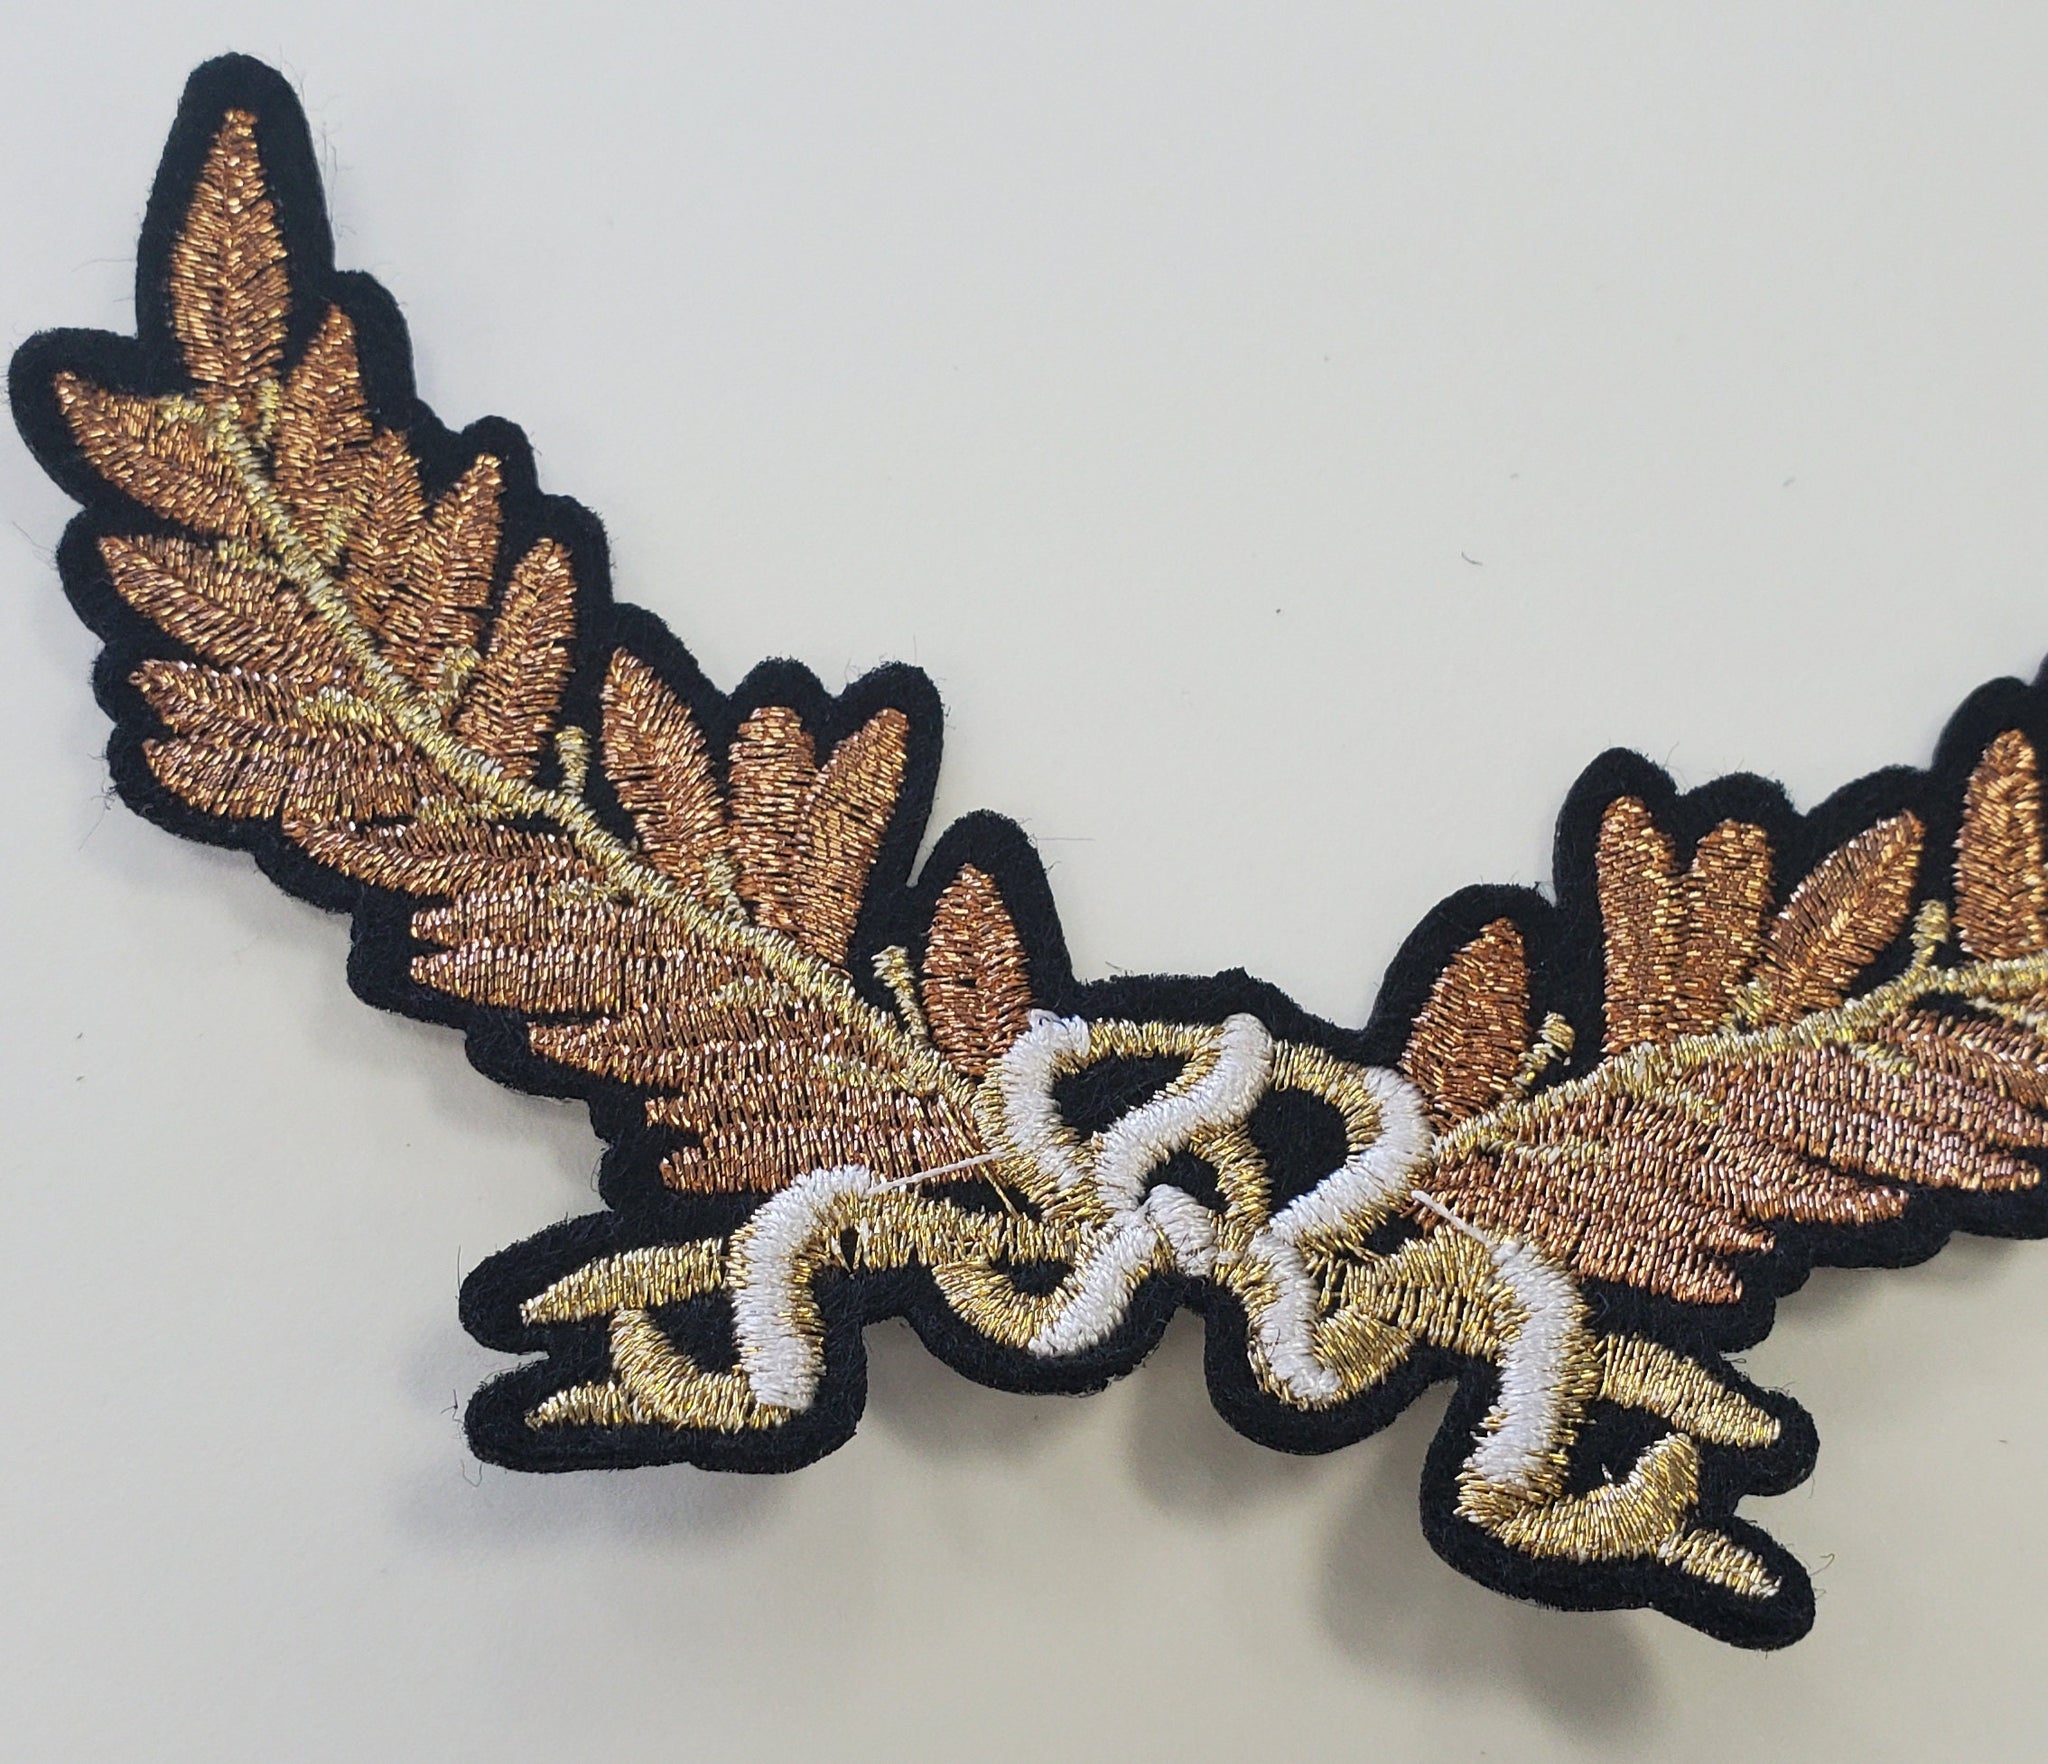 NEW, Feathered Wing Royalty Crest, Gold Metallic, Copper, and Black Emblem patch, DIY, Embroidered Applique Iron On Patch, Size 6"